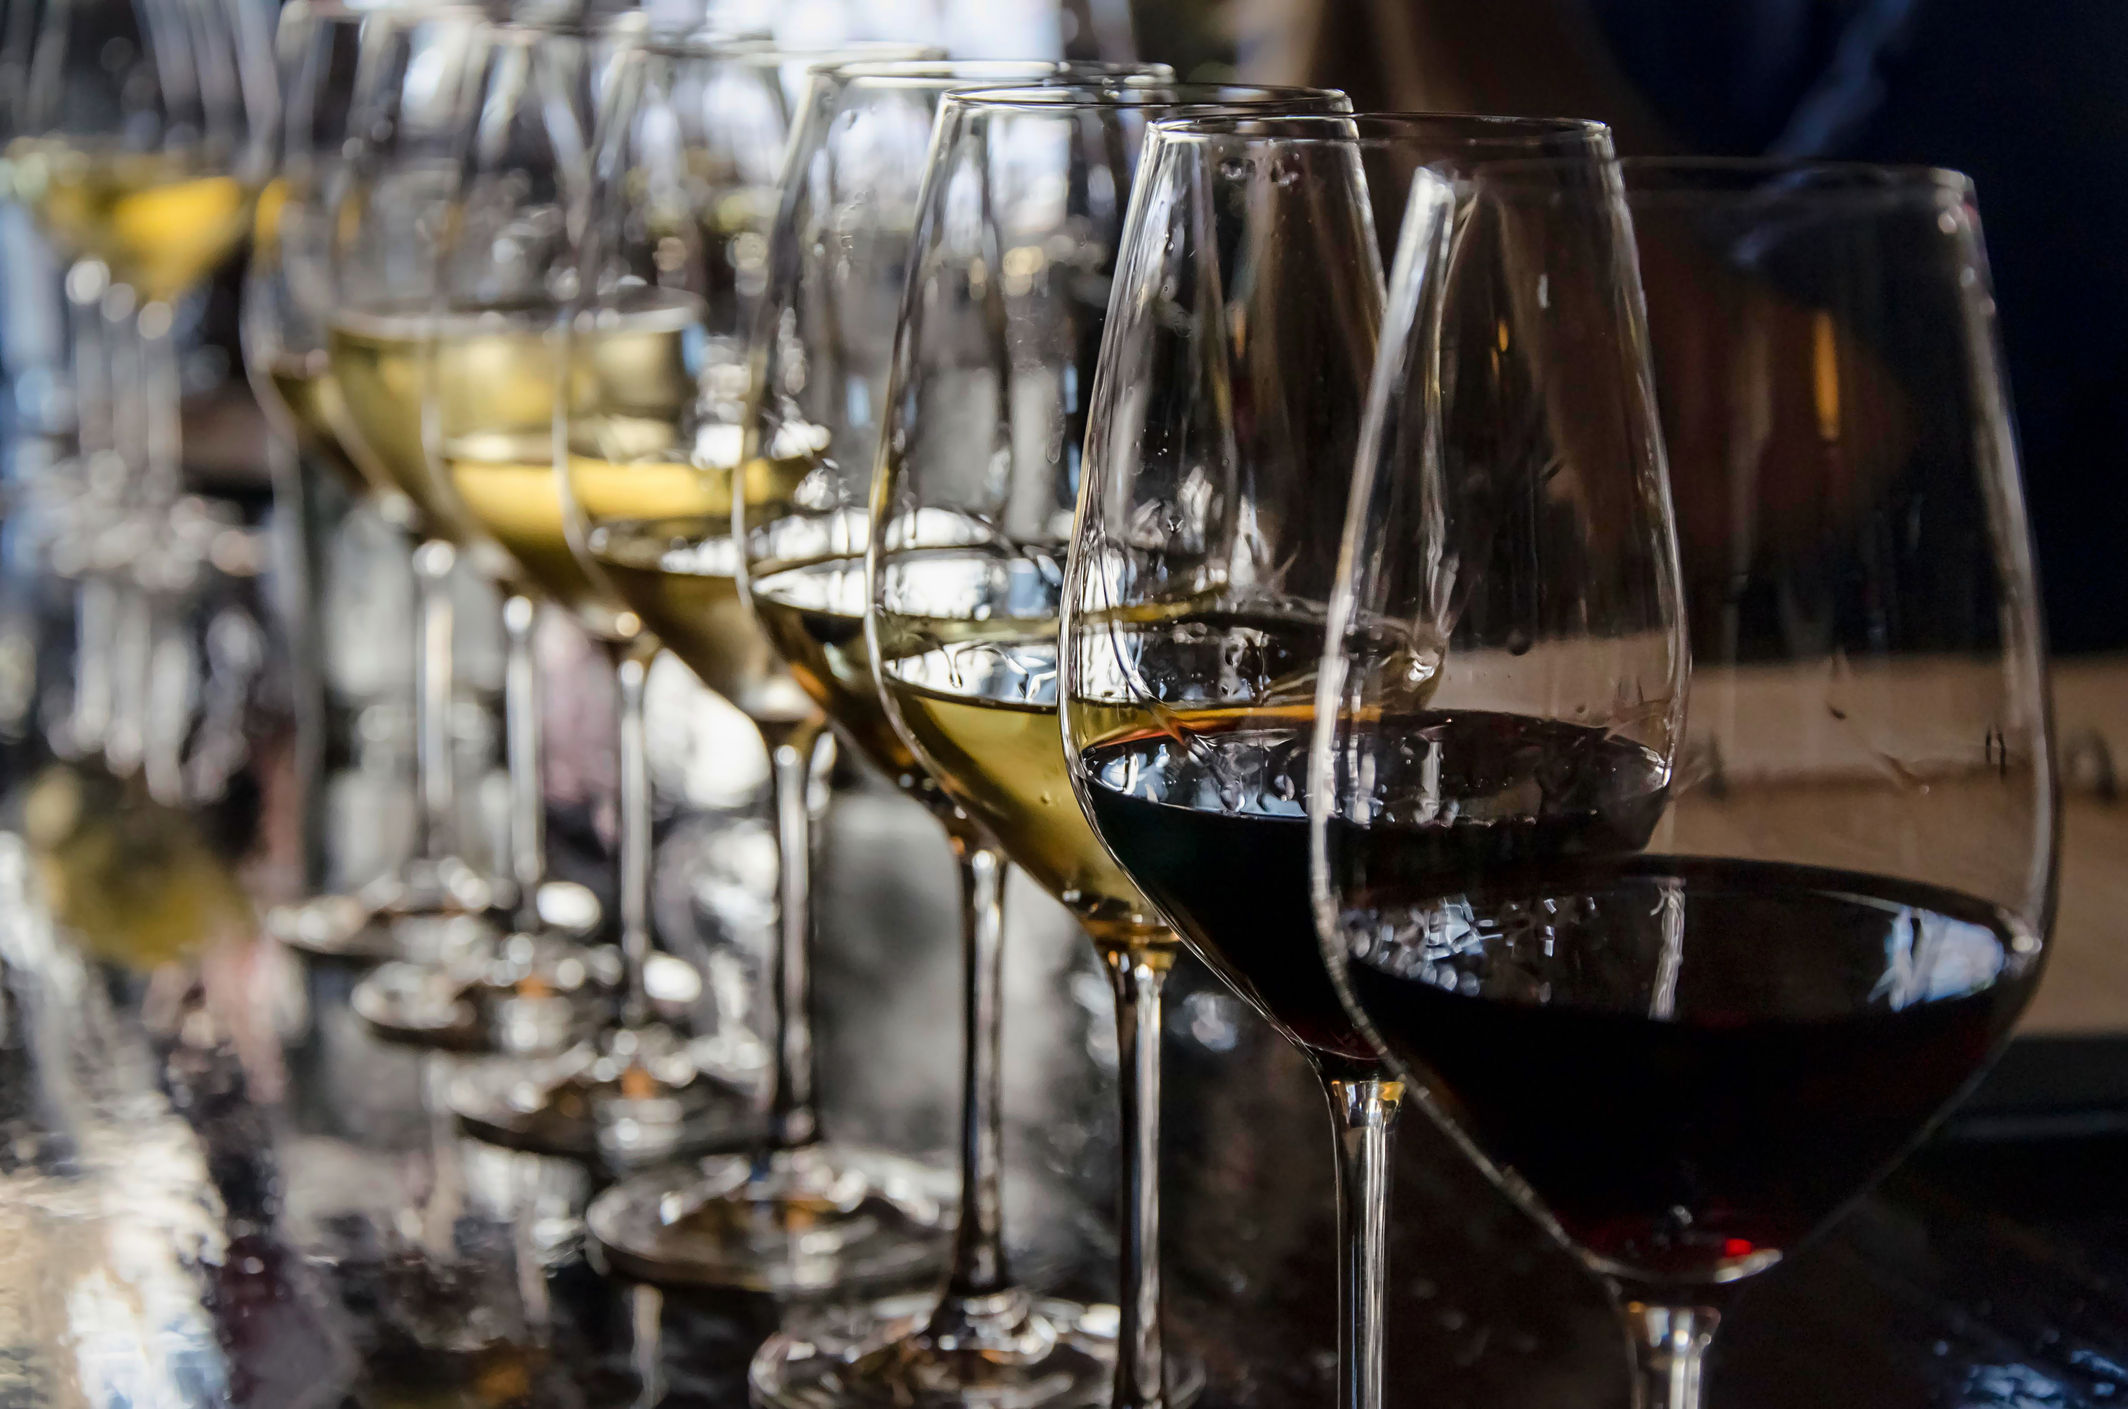 These 4 wine tasting classes in Singapore will teach you all you need to know